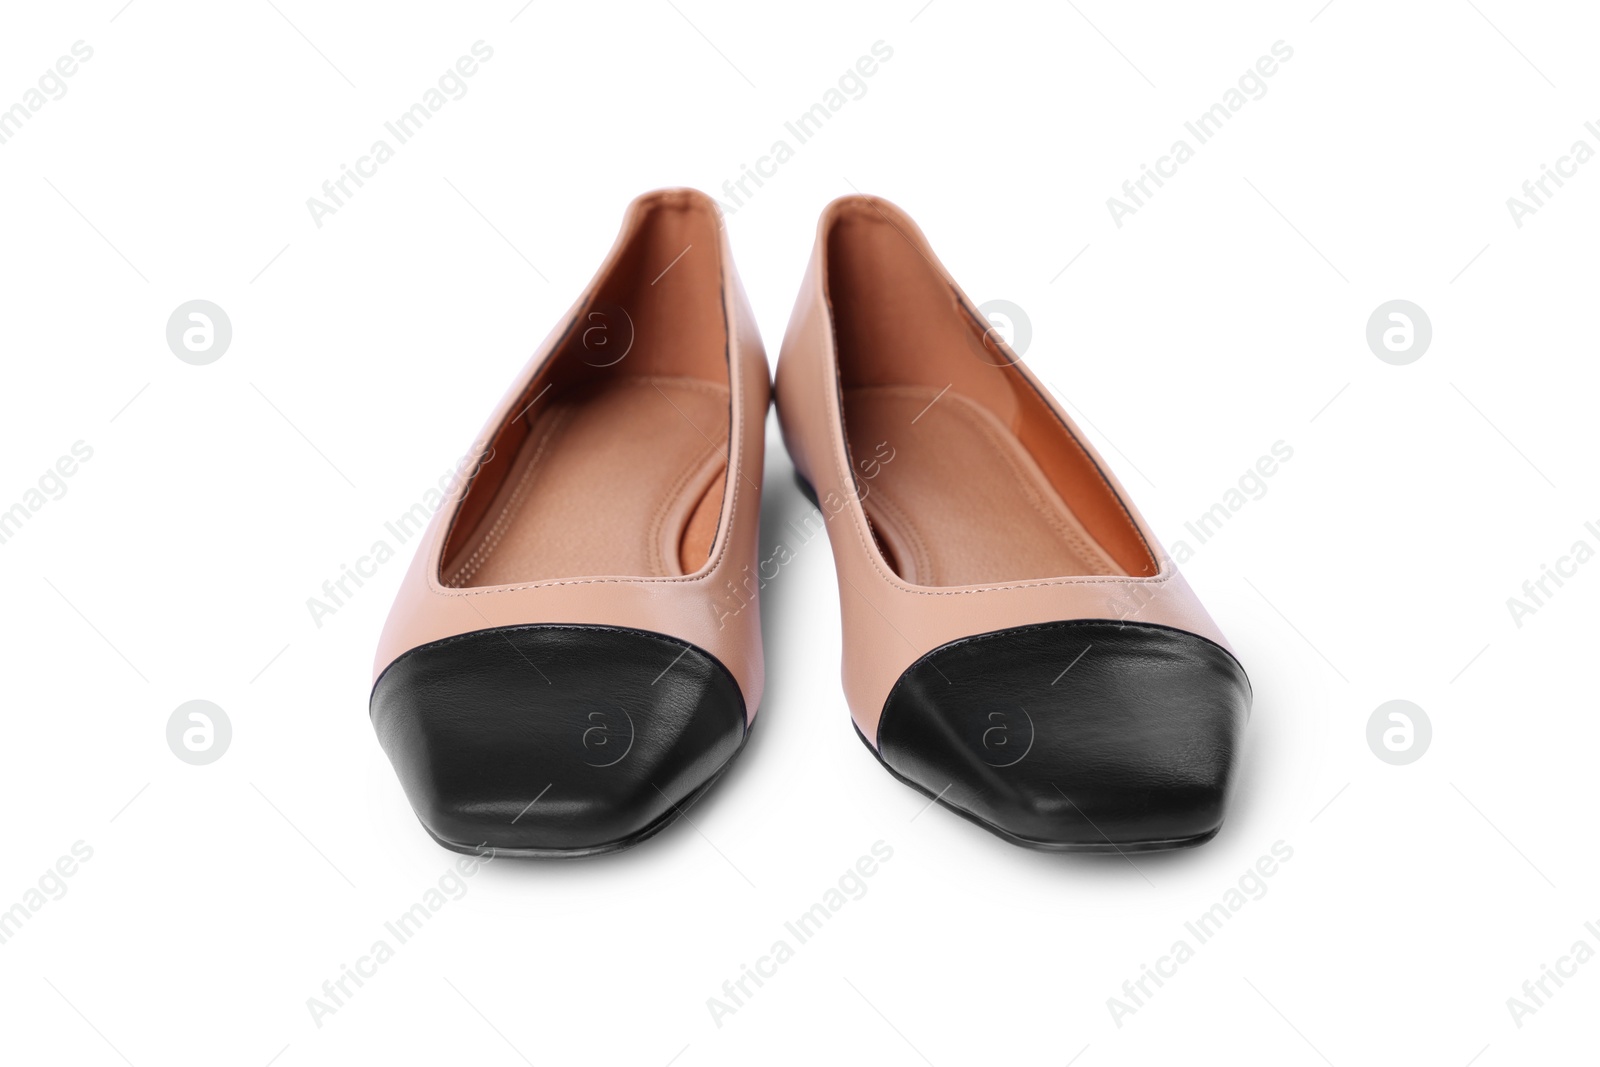 Photo of Pair of new stylish square toe ballet flats on white background